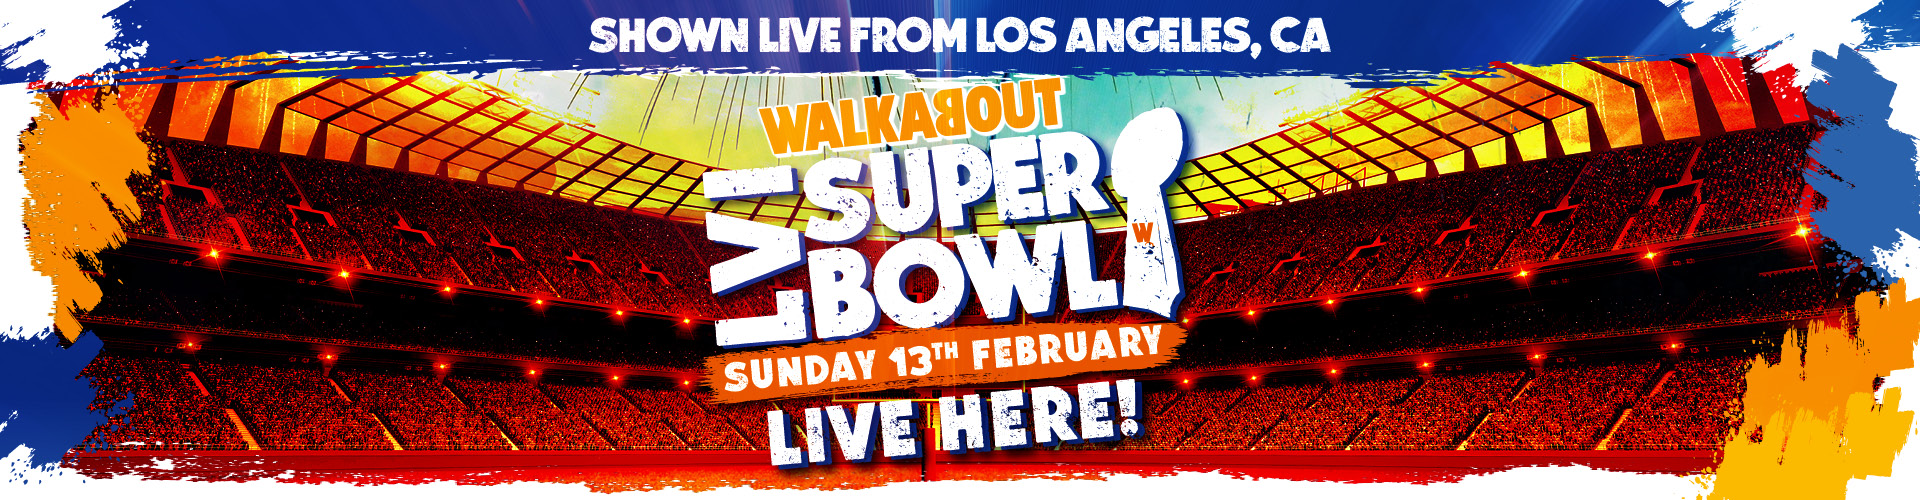 Shown live from Los Angeles - Super Bowl LVI